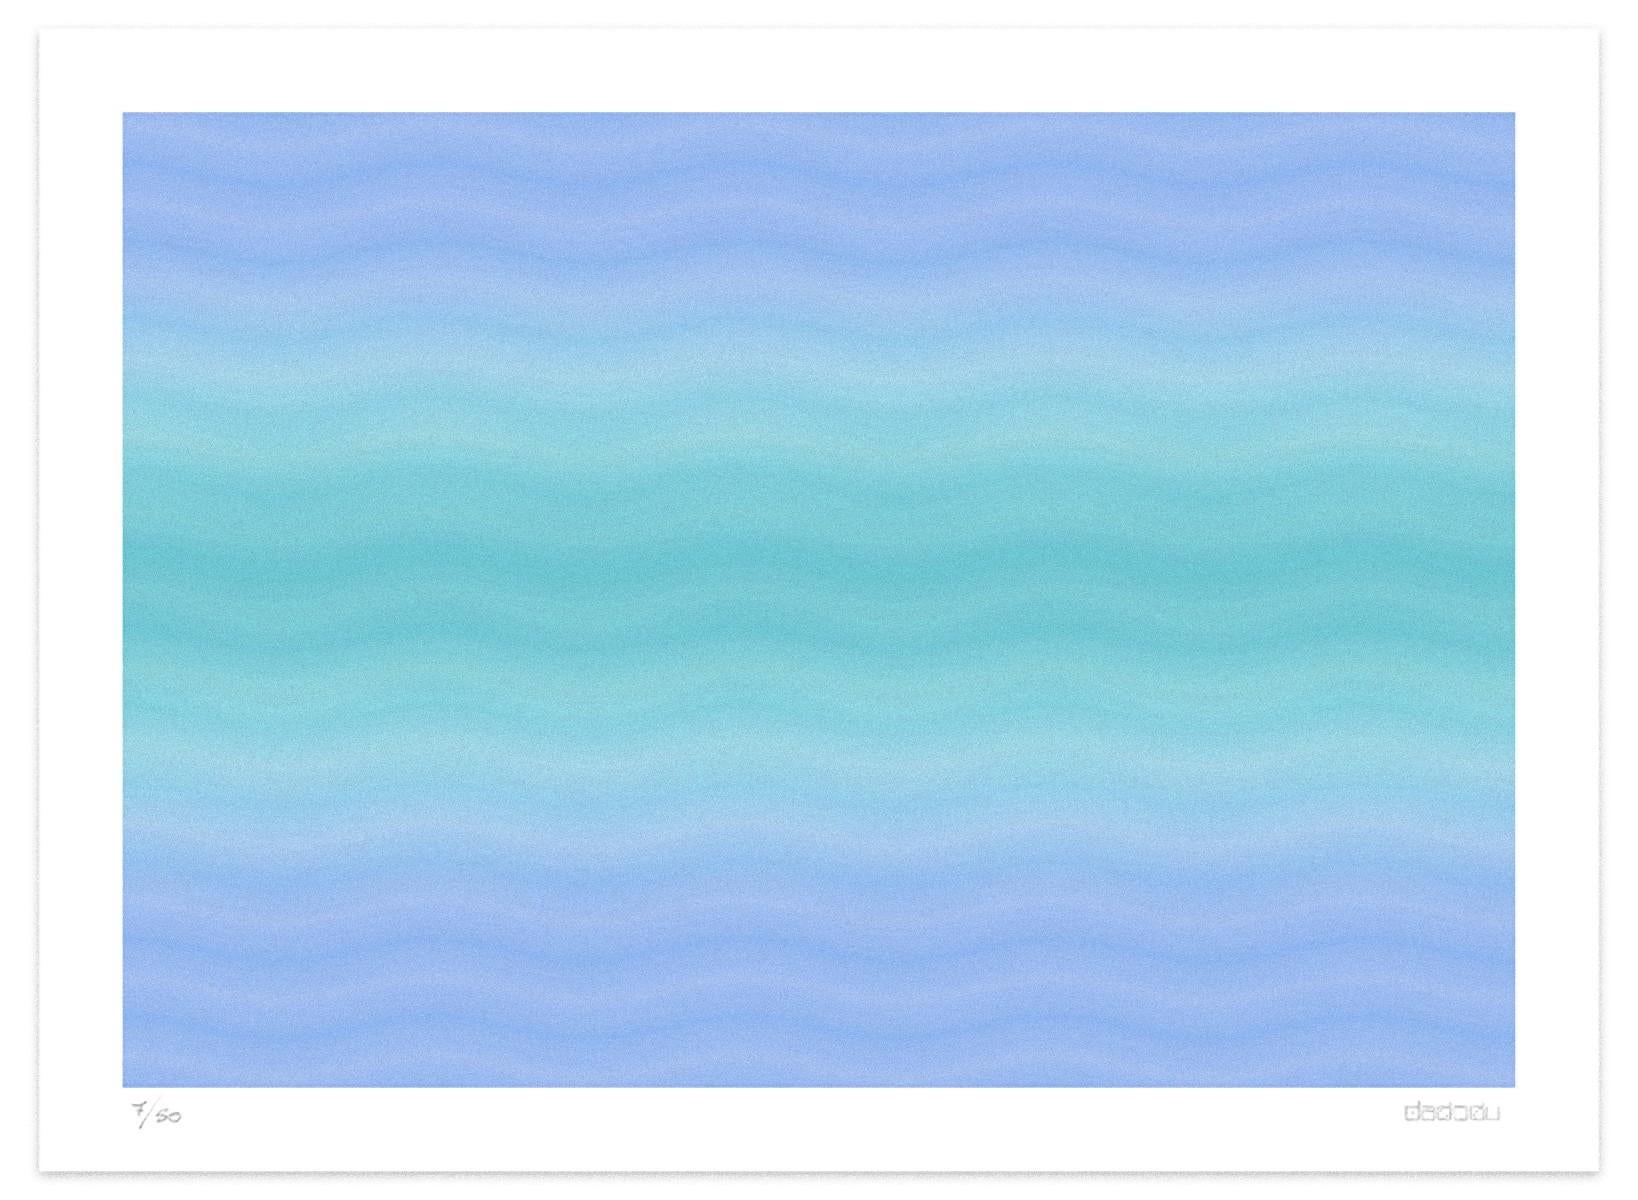 Paradise  is a peaceful  giclée print realized by the contemporary artist Dadodu in 2011.

This original artwork represents a light blue abstract composition with horizontal wavy lines fading in each other.

Hand-signed on the lower right corner